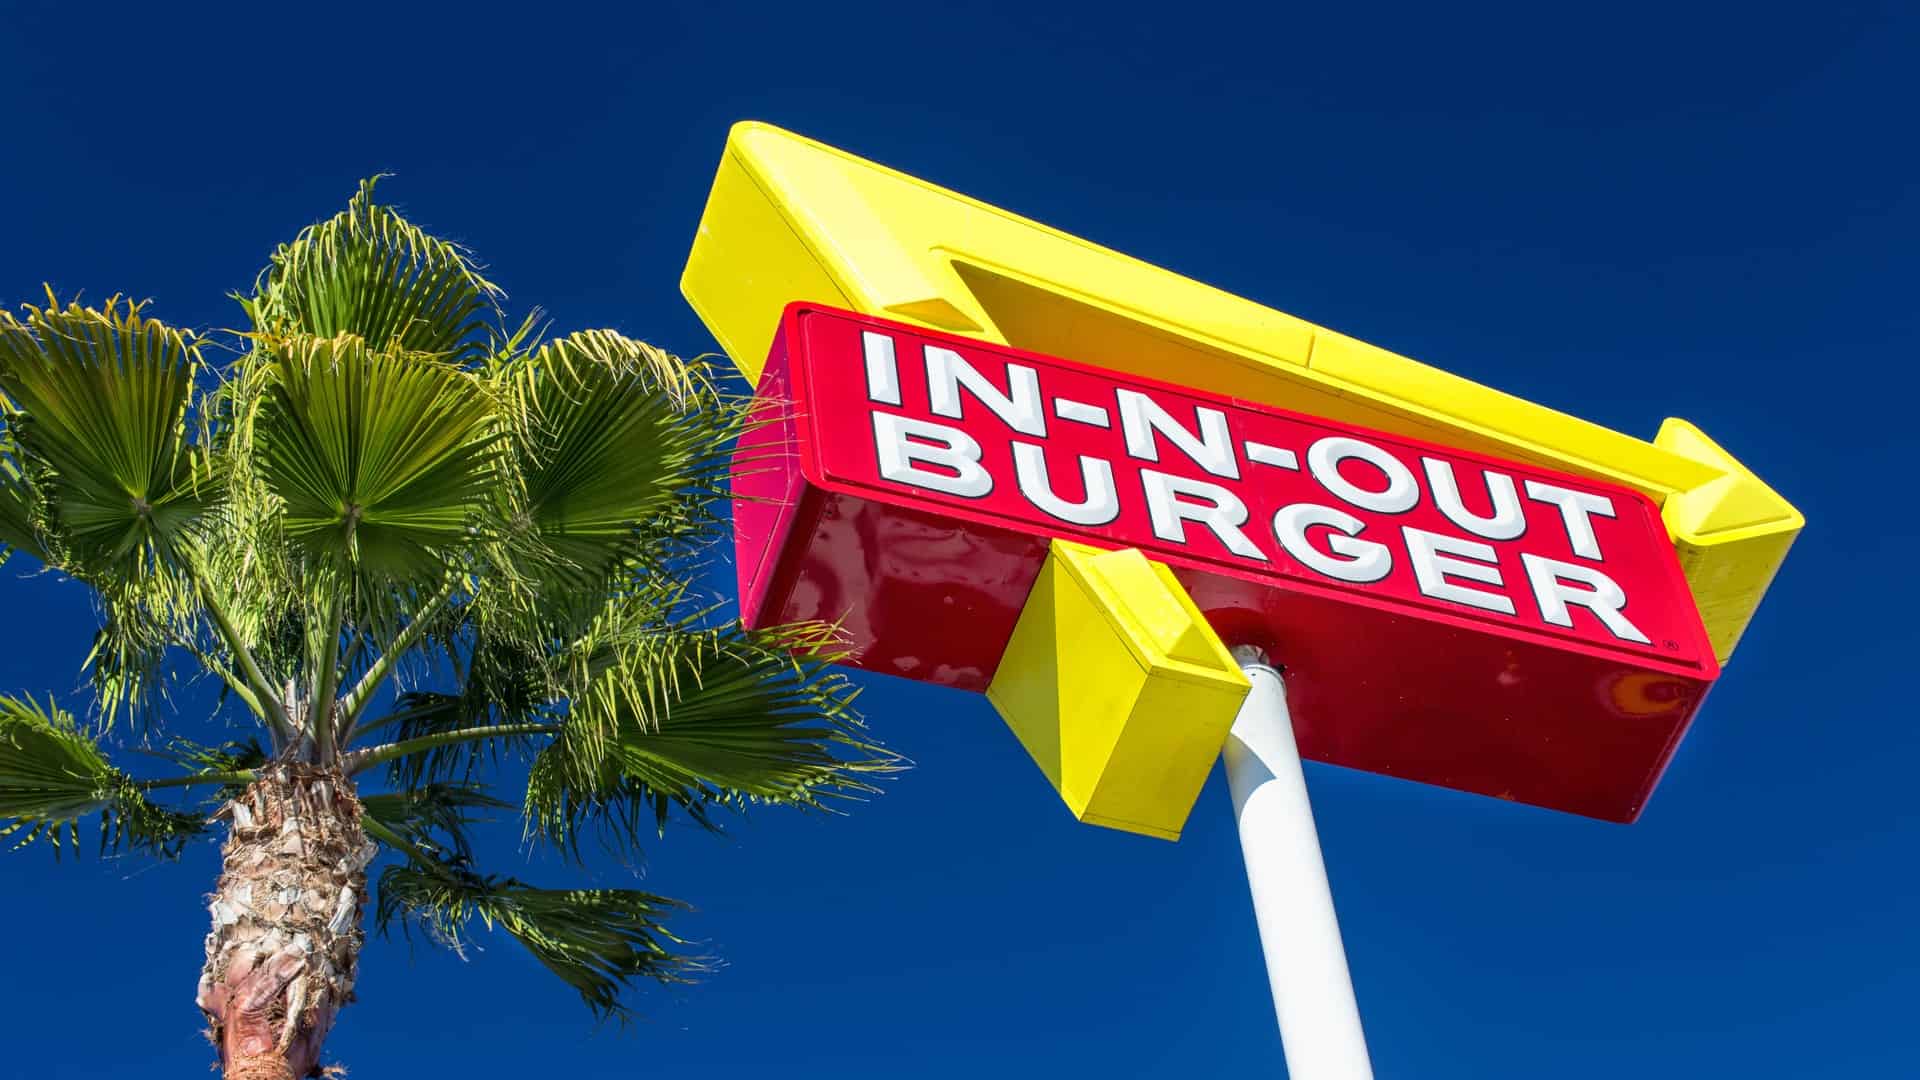 <p>One thing that makes In-N-Out so irresistible is the top-secret menu. Before you head to this yummy fast food chain, be sure to google the un-advertised menu and see what tasty burger creations you can find. You’ll have to head out west to get In-N-Out but stores are opening up on the east coast too!</p>